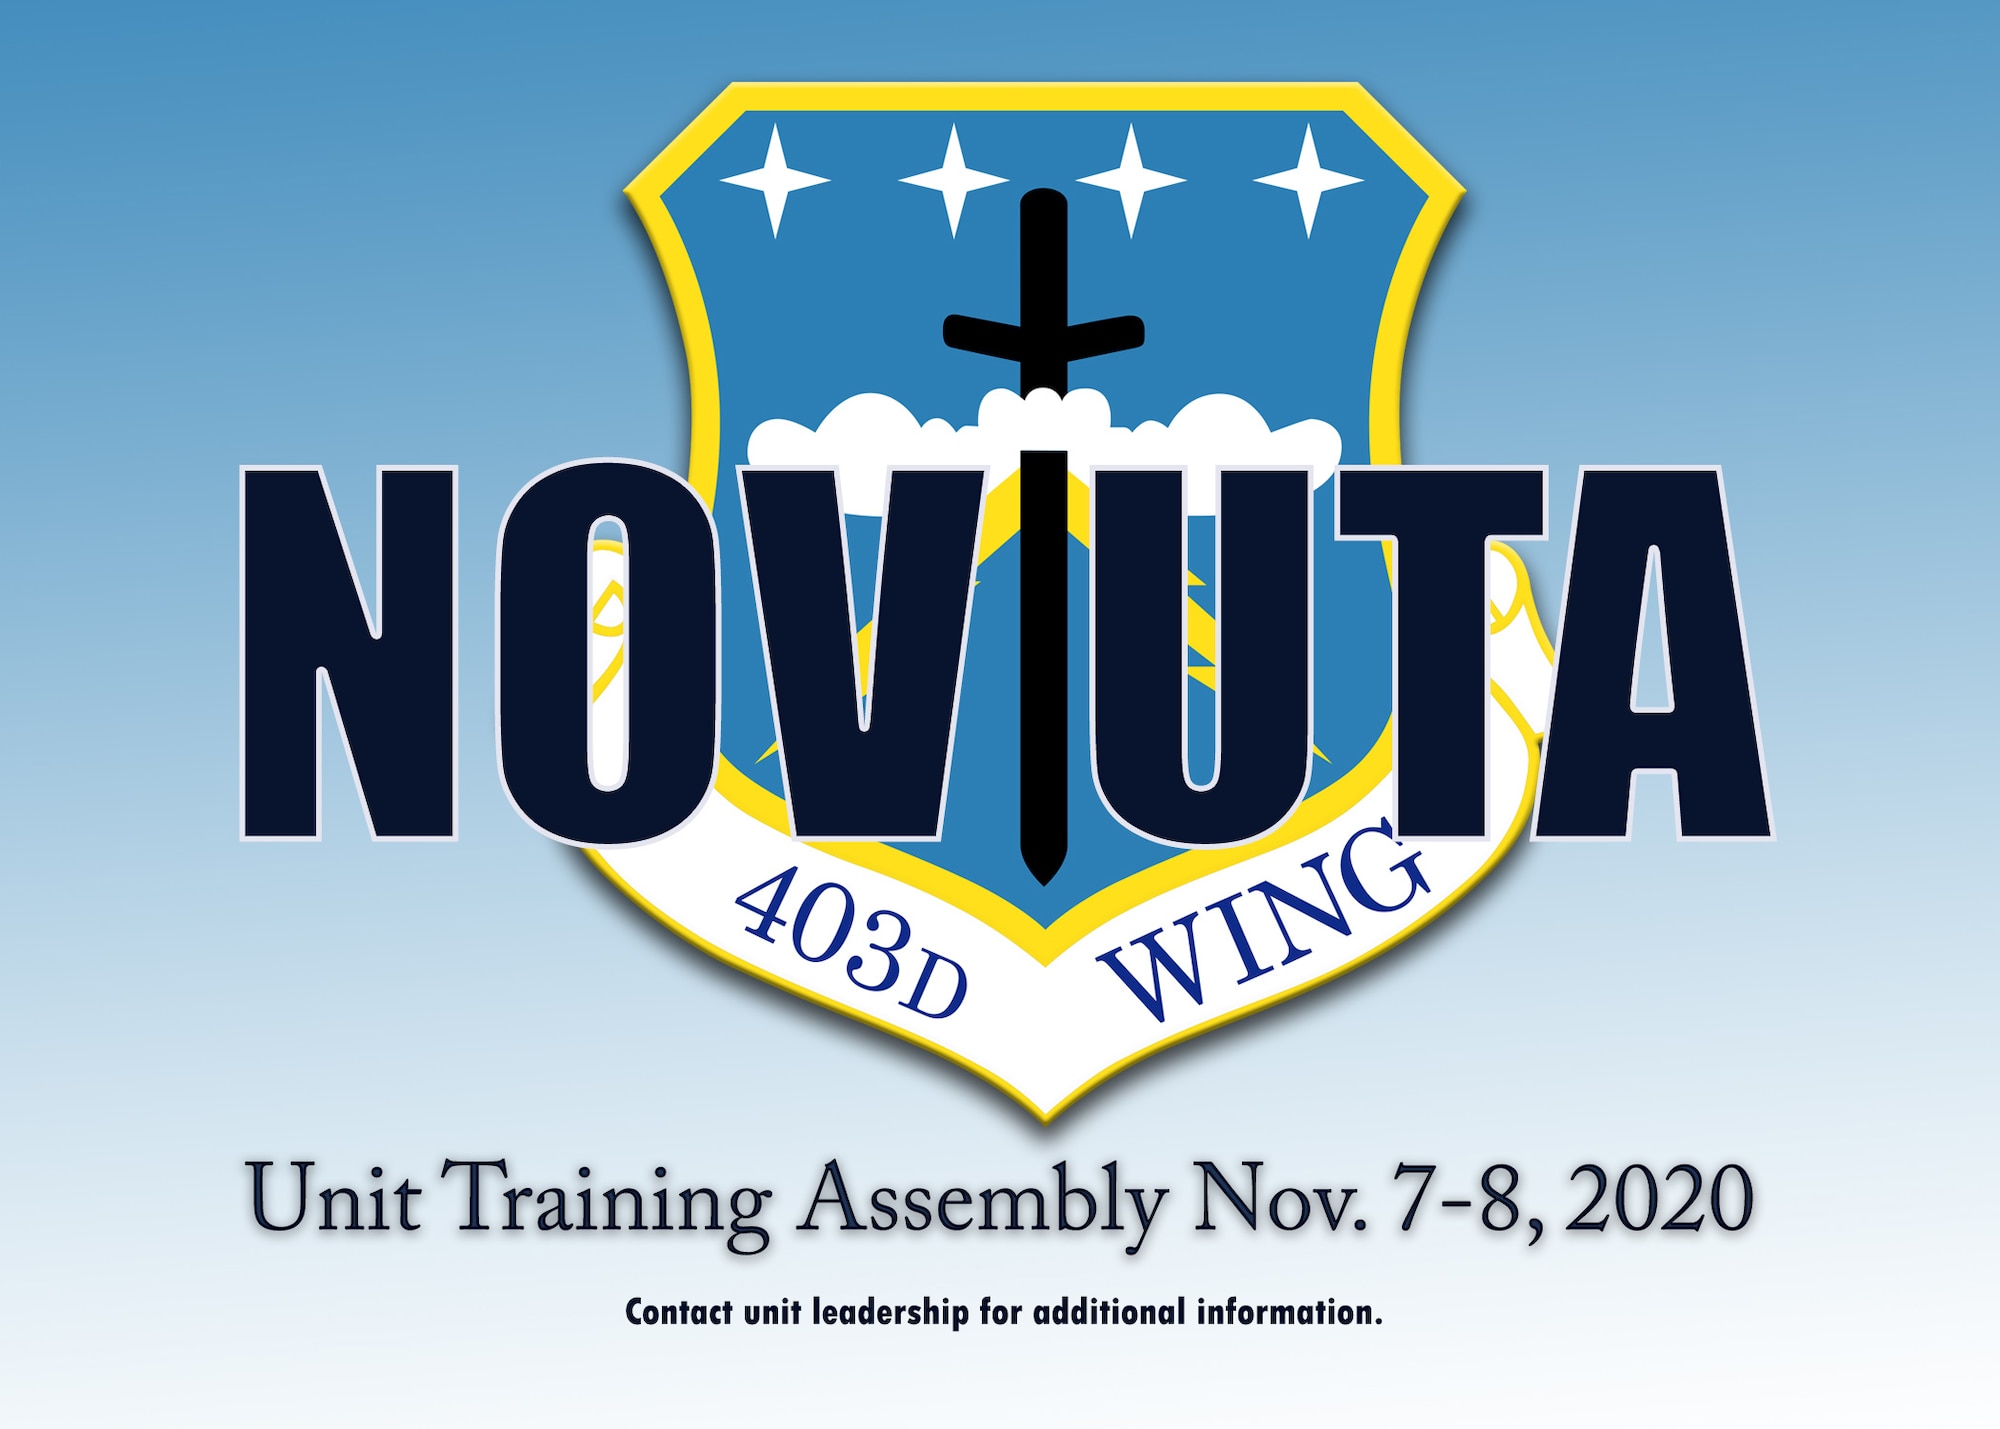 The 403rd Wing will have a UTA Nov. 7-8, 2020, with COVID-19 mitigation measures in place. (U.S. Air Force graphic by Lt. Col. Marnee A.C. Losurdo)